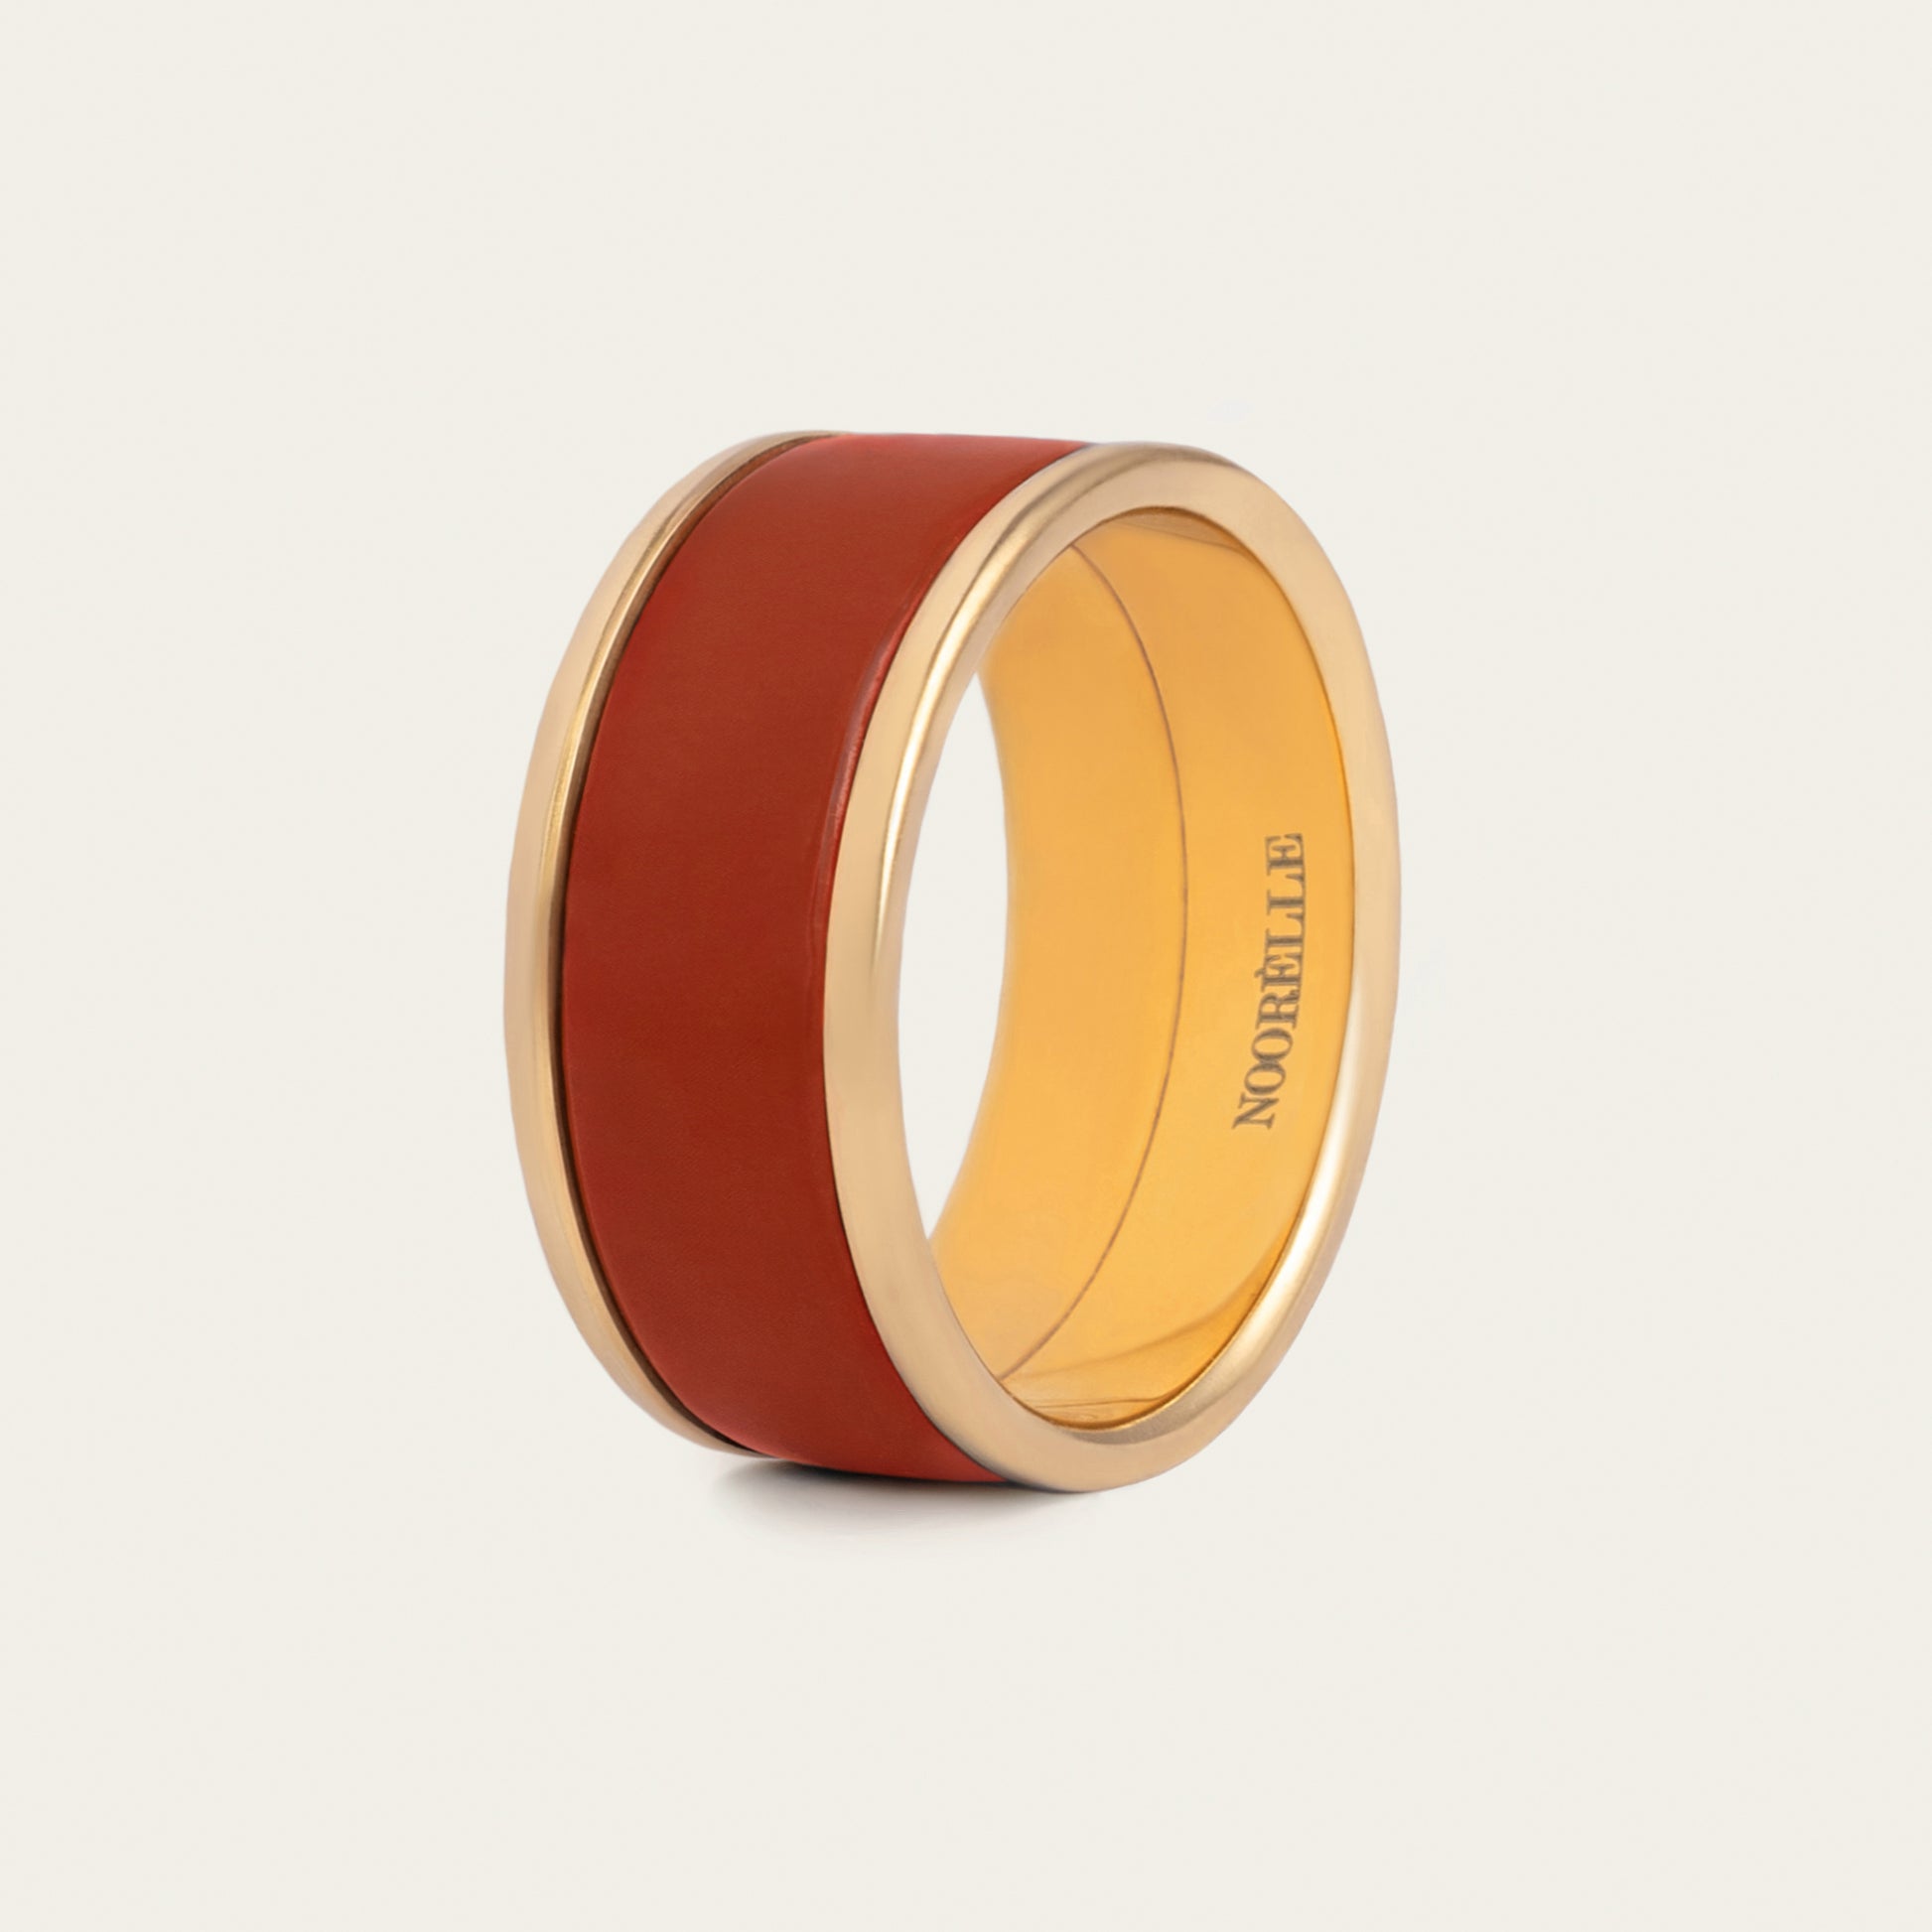 noorelle, monochrome orange ring, jewellery, ring, monochrome ring, ring for girls, gold ring, gold and red ring, 